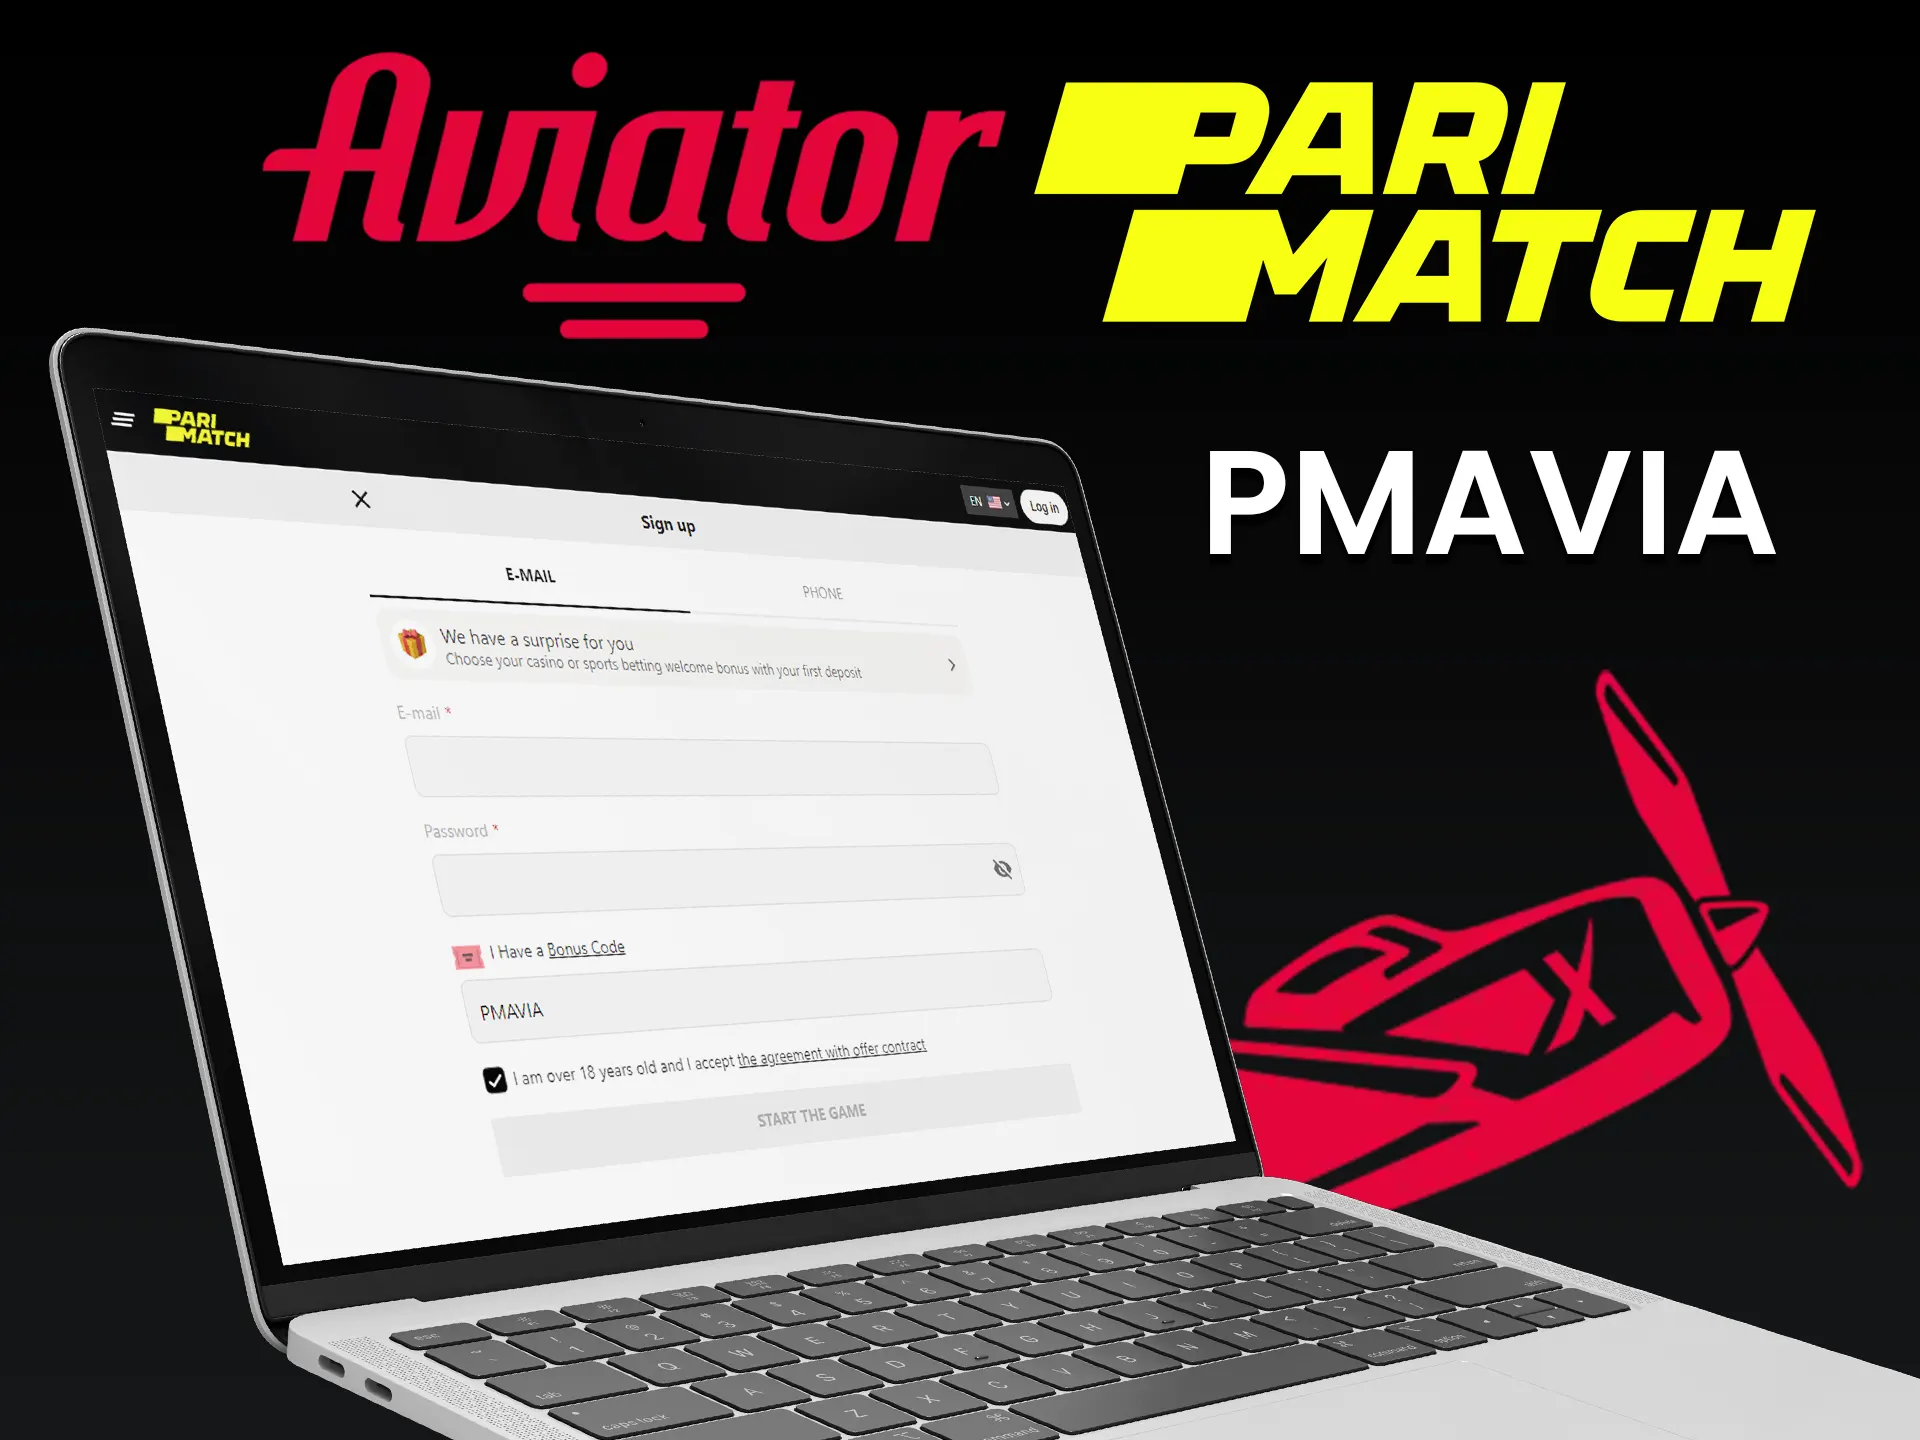 Use the promo code from Parimatch to play Aviator.